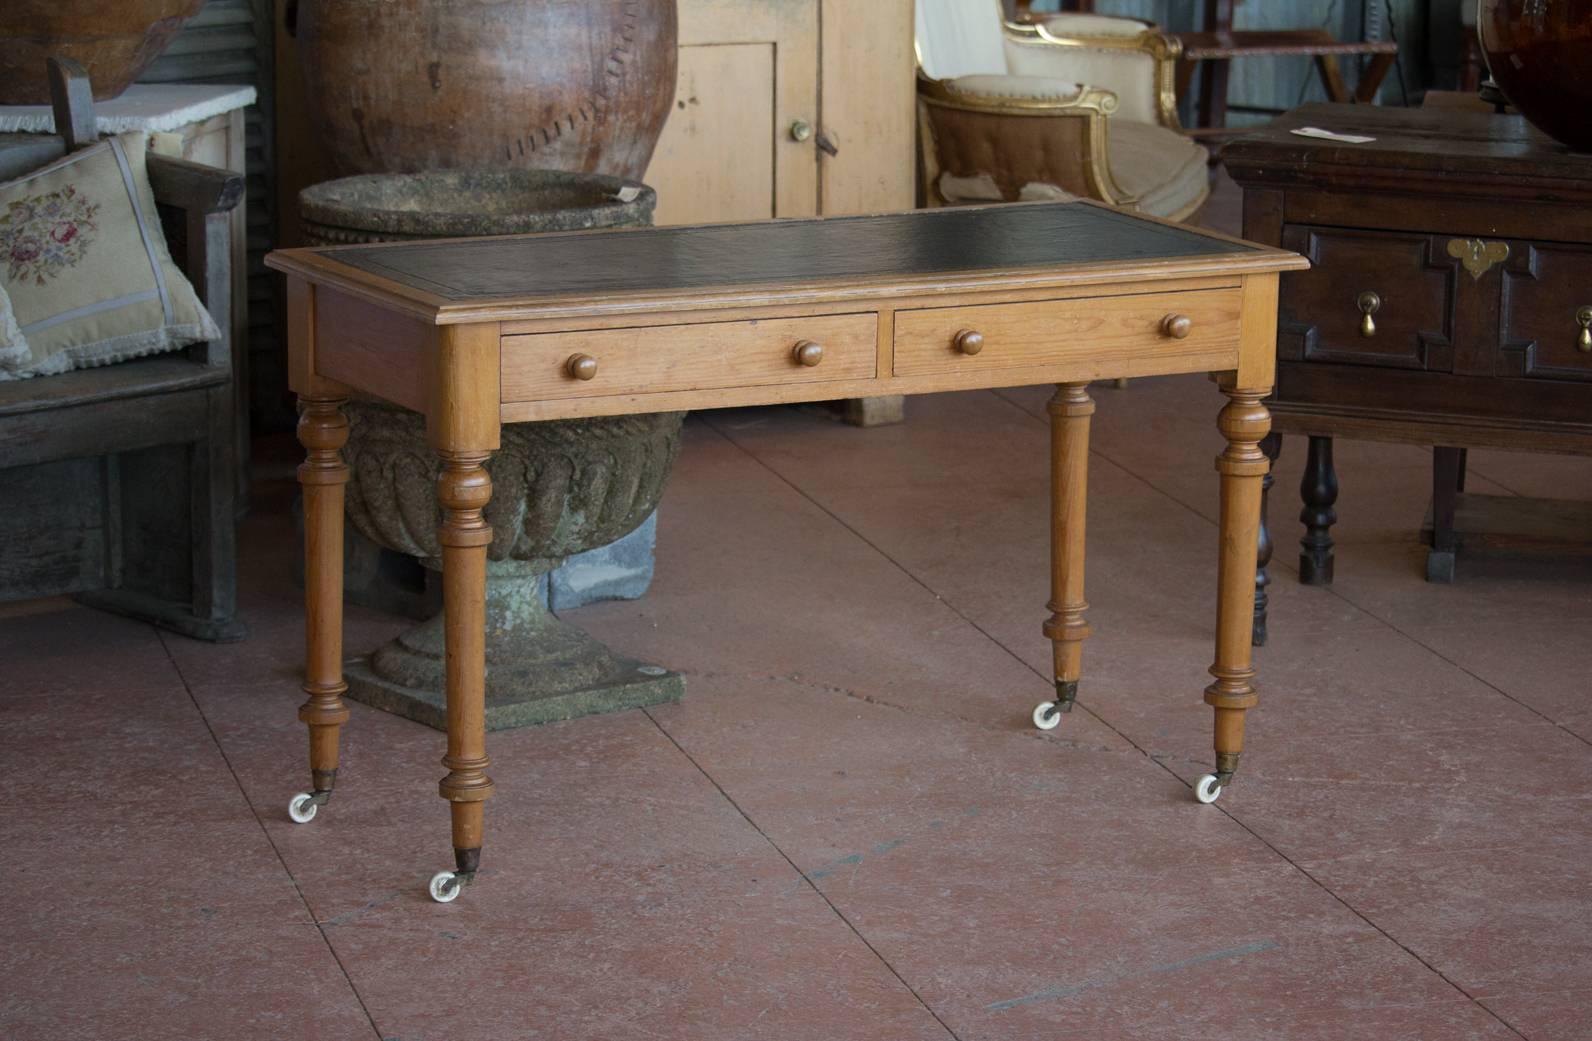 Antique English tooled dark blue leather top desk. The desk is on lovely turned legs with original casters.